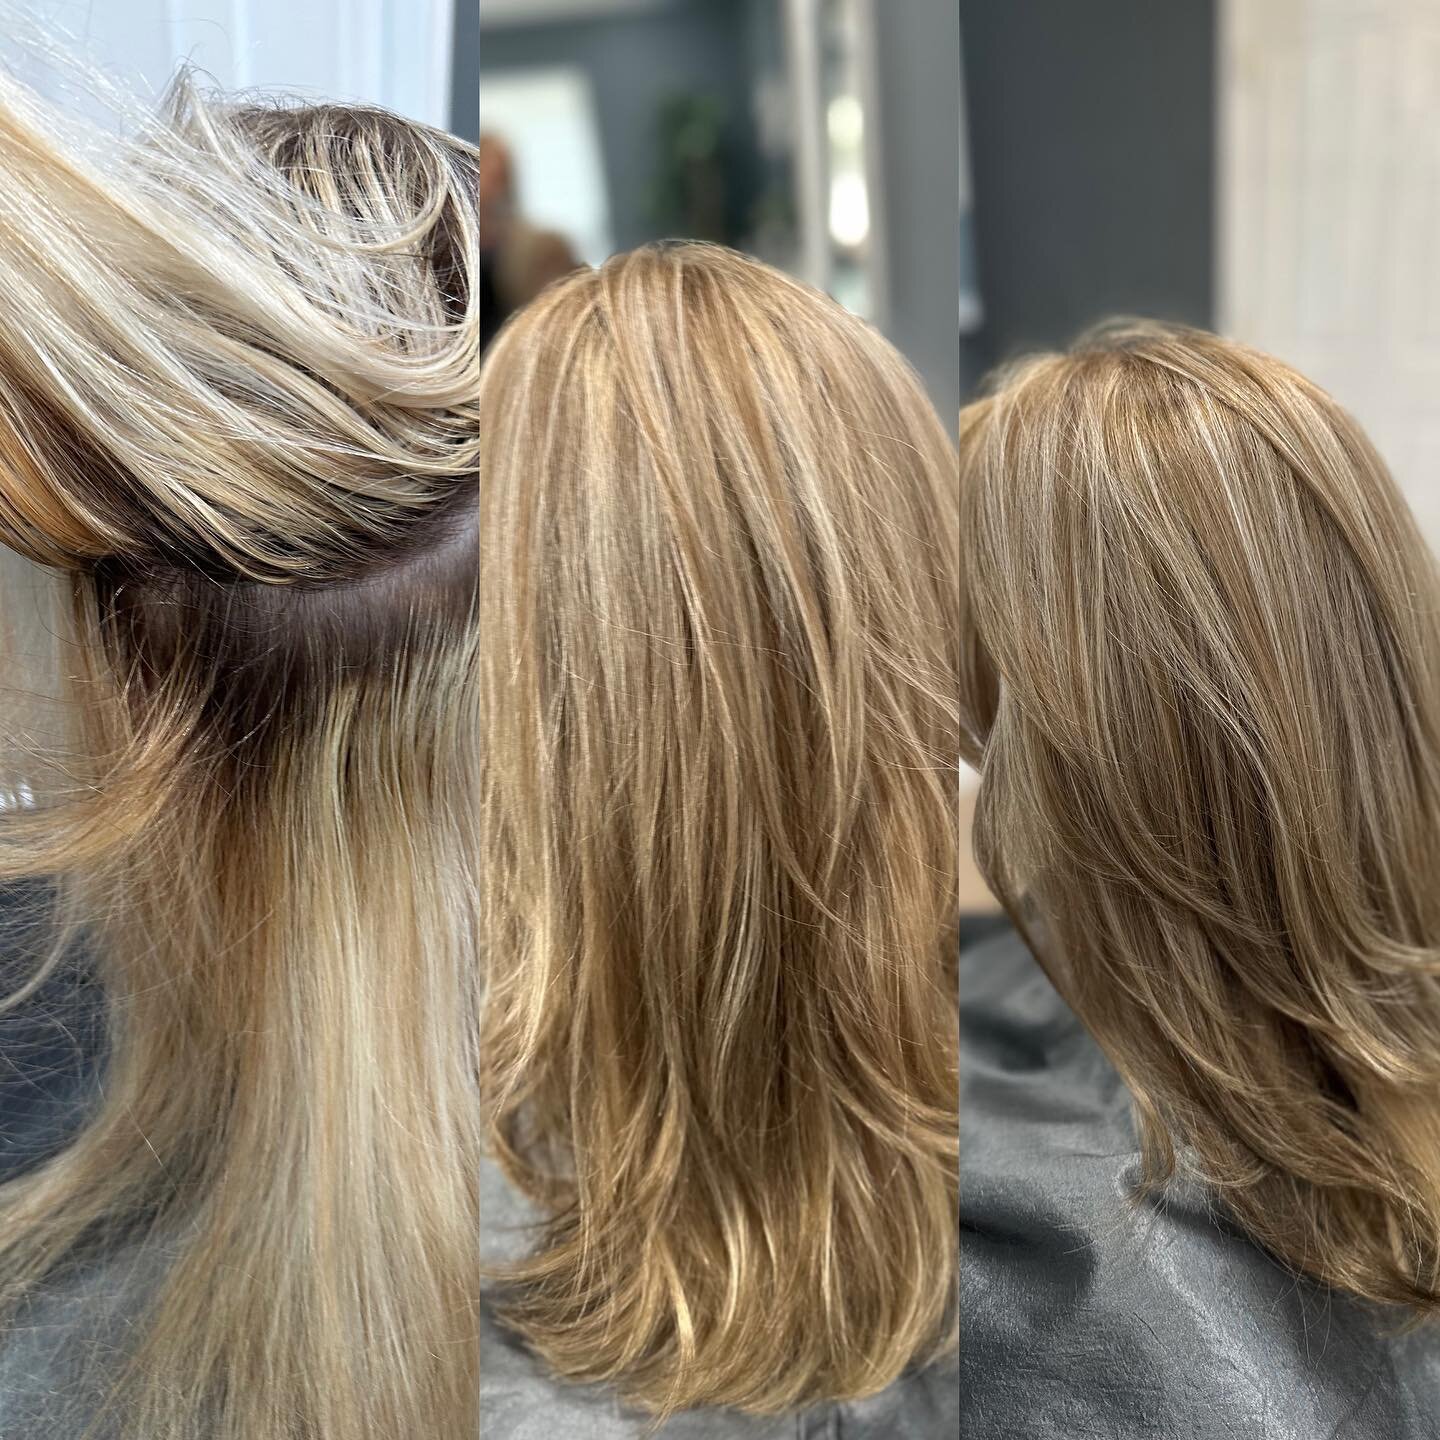 This client of mine came in for color correction it was  overly bleached and multiple brassy colors and so here is the results 👍🥰#roundrocktx #austinhairsalon #blondehair #colorcorrection #georgetowntx #huttotx